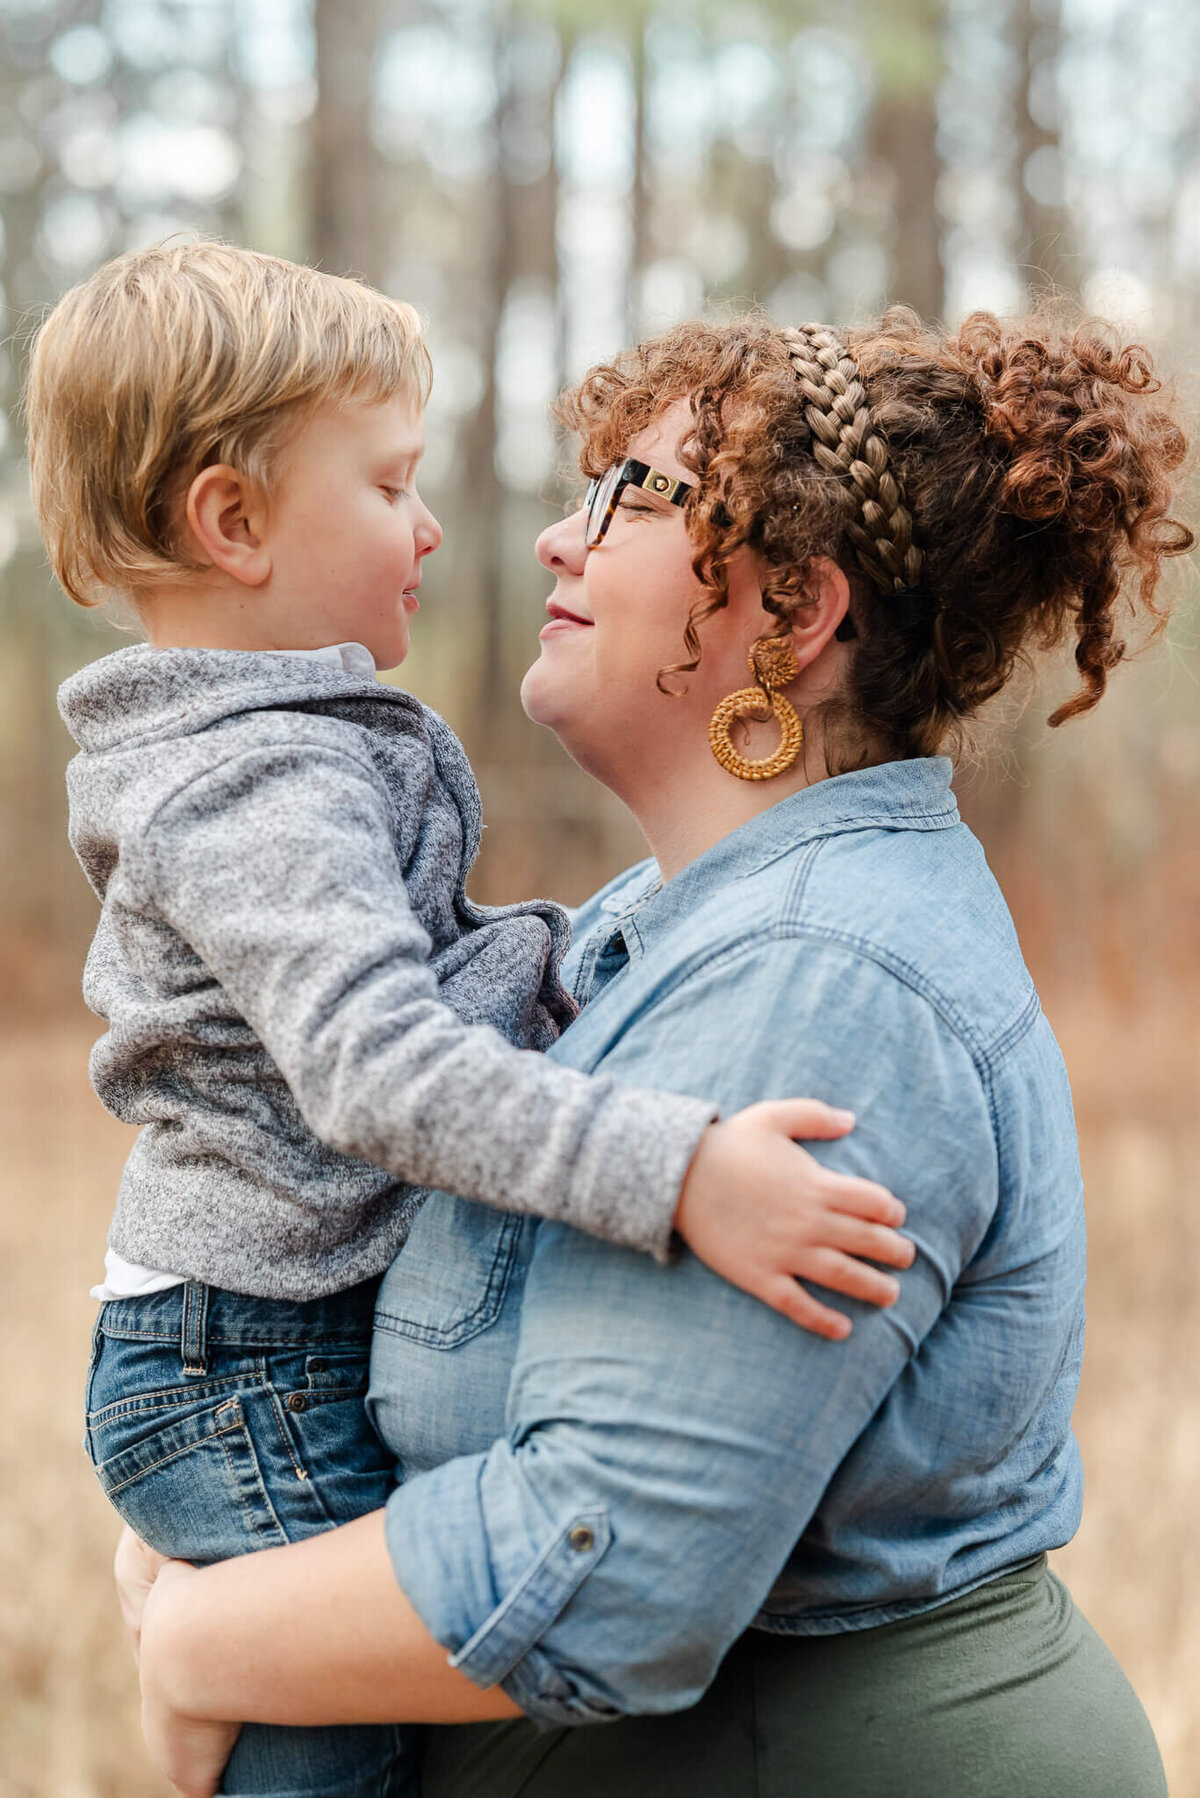 A mother holds her young son during their Virginia Beach family photography session. They look into each other's eyes and smile.